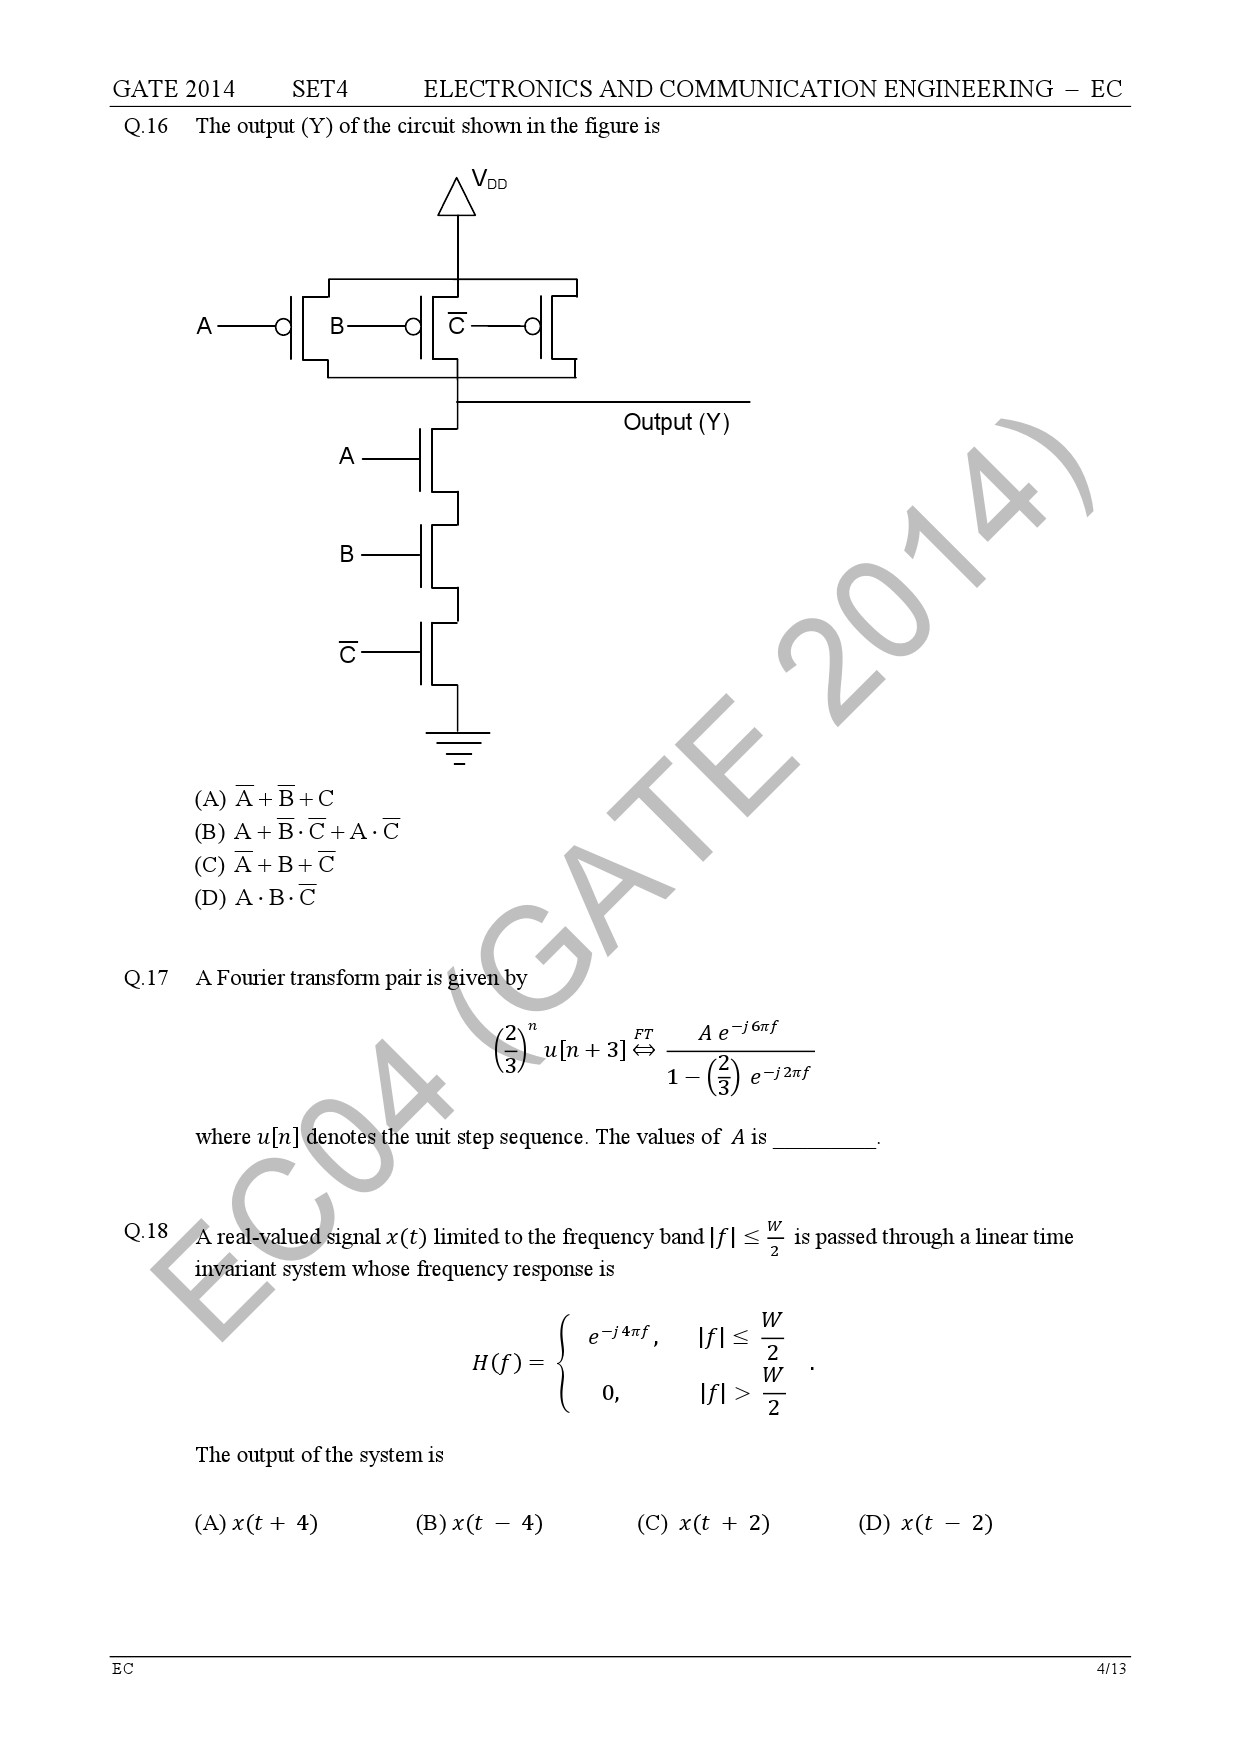 GATE Exam Question Paper 2014 Electronics and Communication Engineering Set 4 10